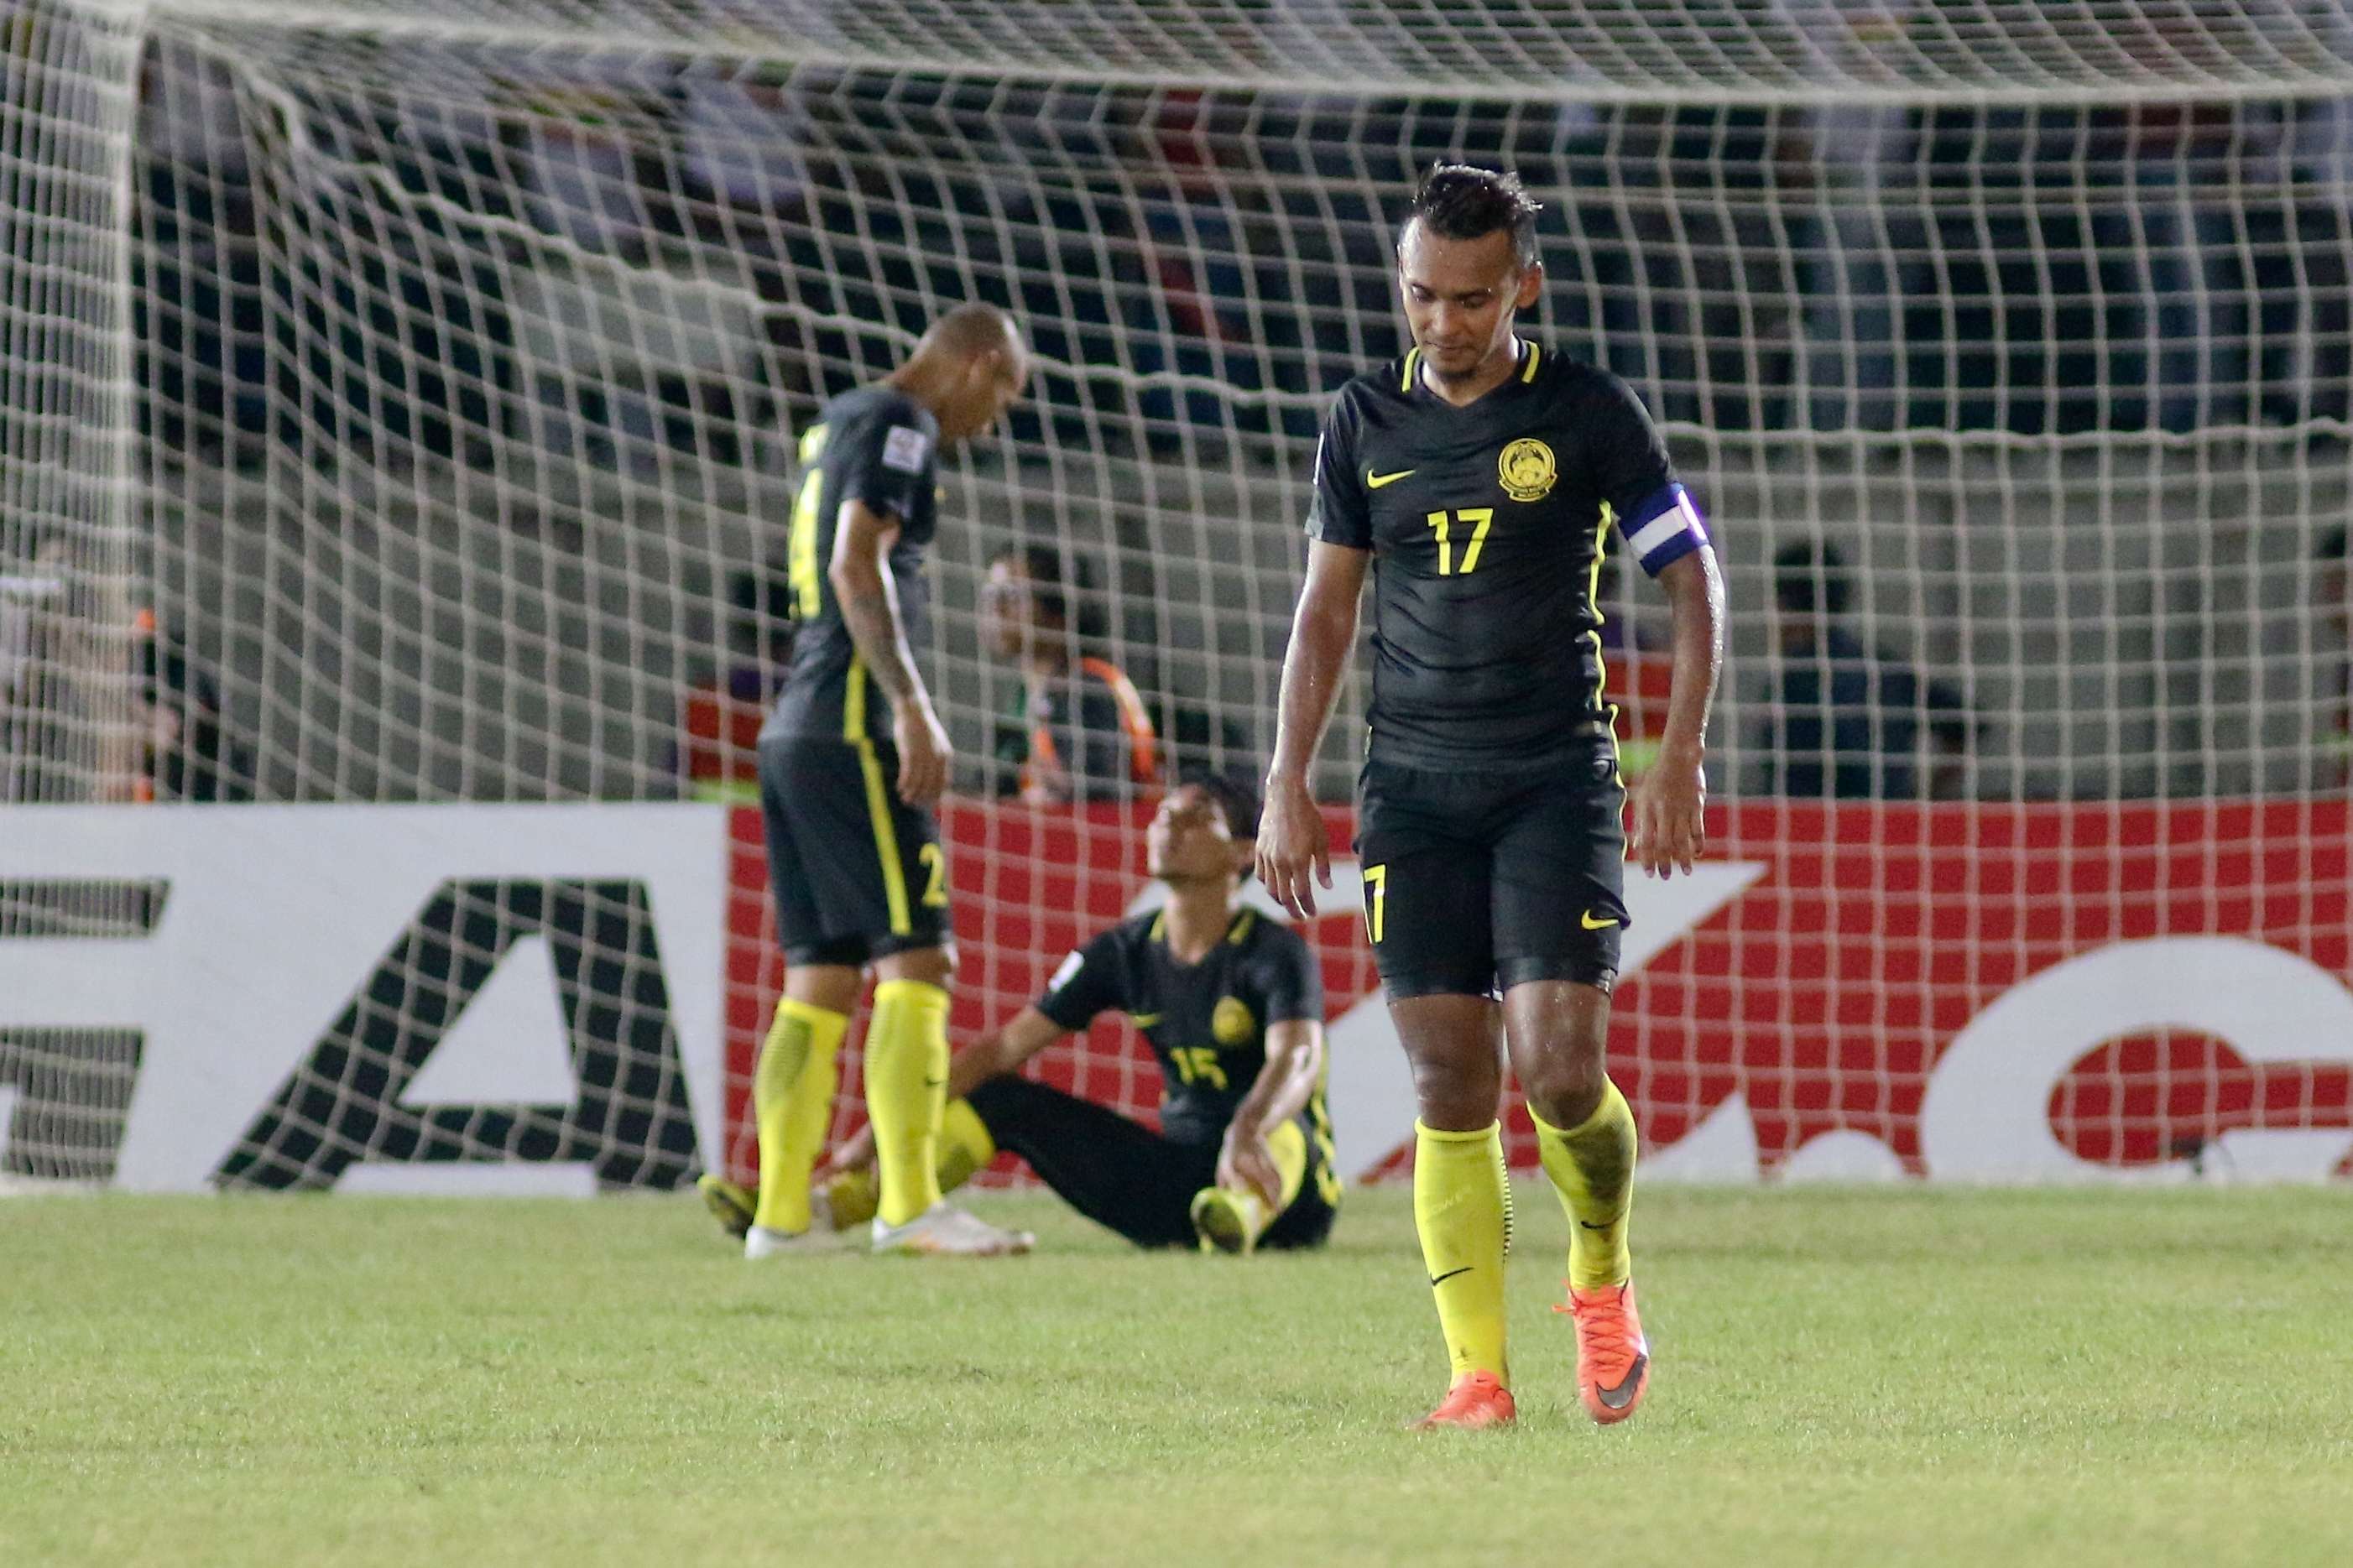 Malaysia's Amri Yahyah disappointed after losing to Myanmar - 2016 AFF Suzuki Cup 27/11/16